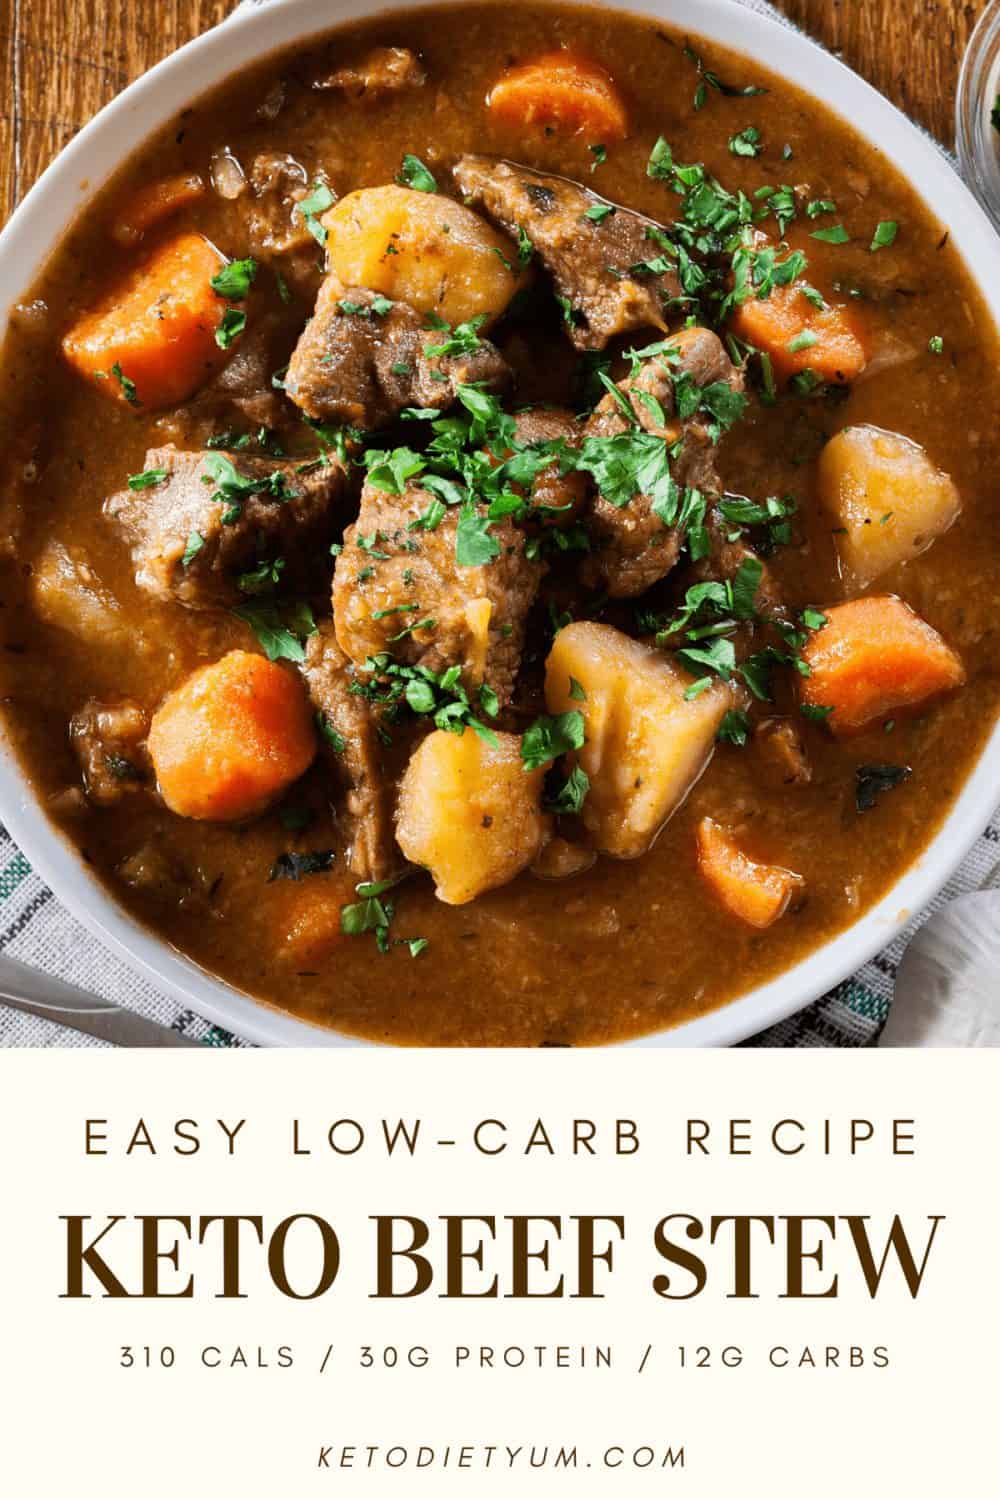 This keto beef stew is low carb with tender beef that melts in your mouth and perfectly cooked veggies. Gluten-free and perfect for anyone the low-carb ketogenic diet. #ketodiet #lowcarbrecipes #beefstew